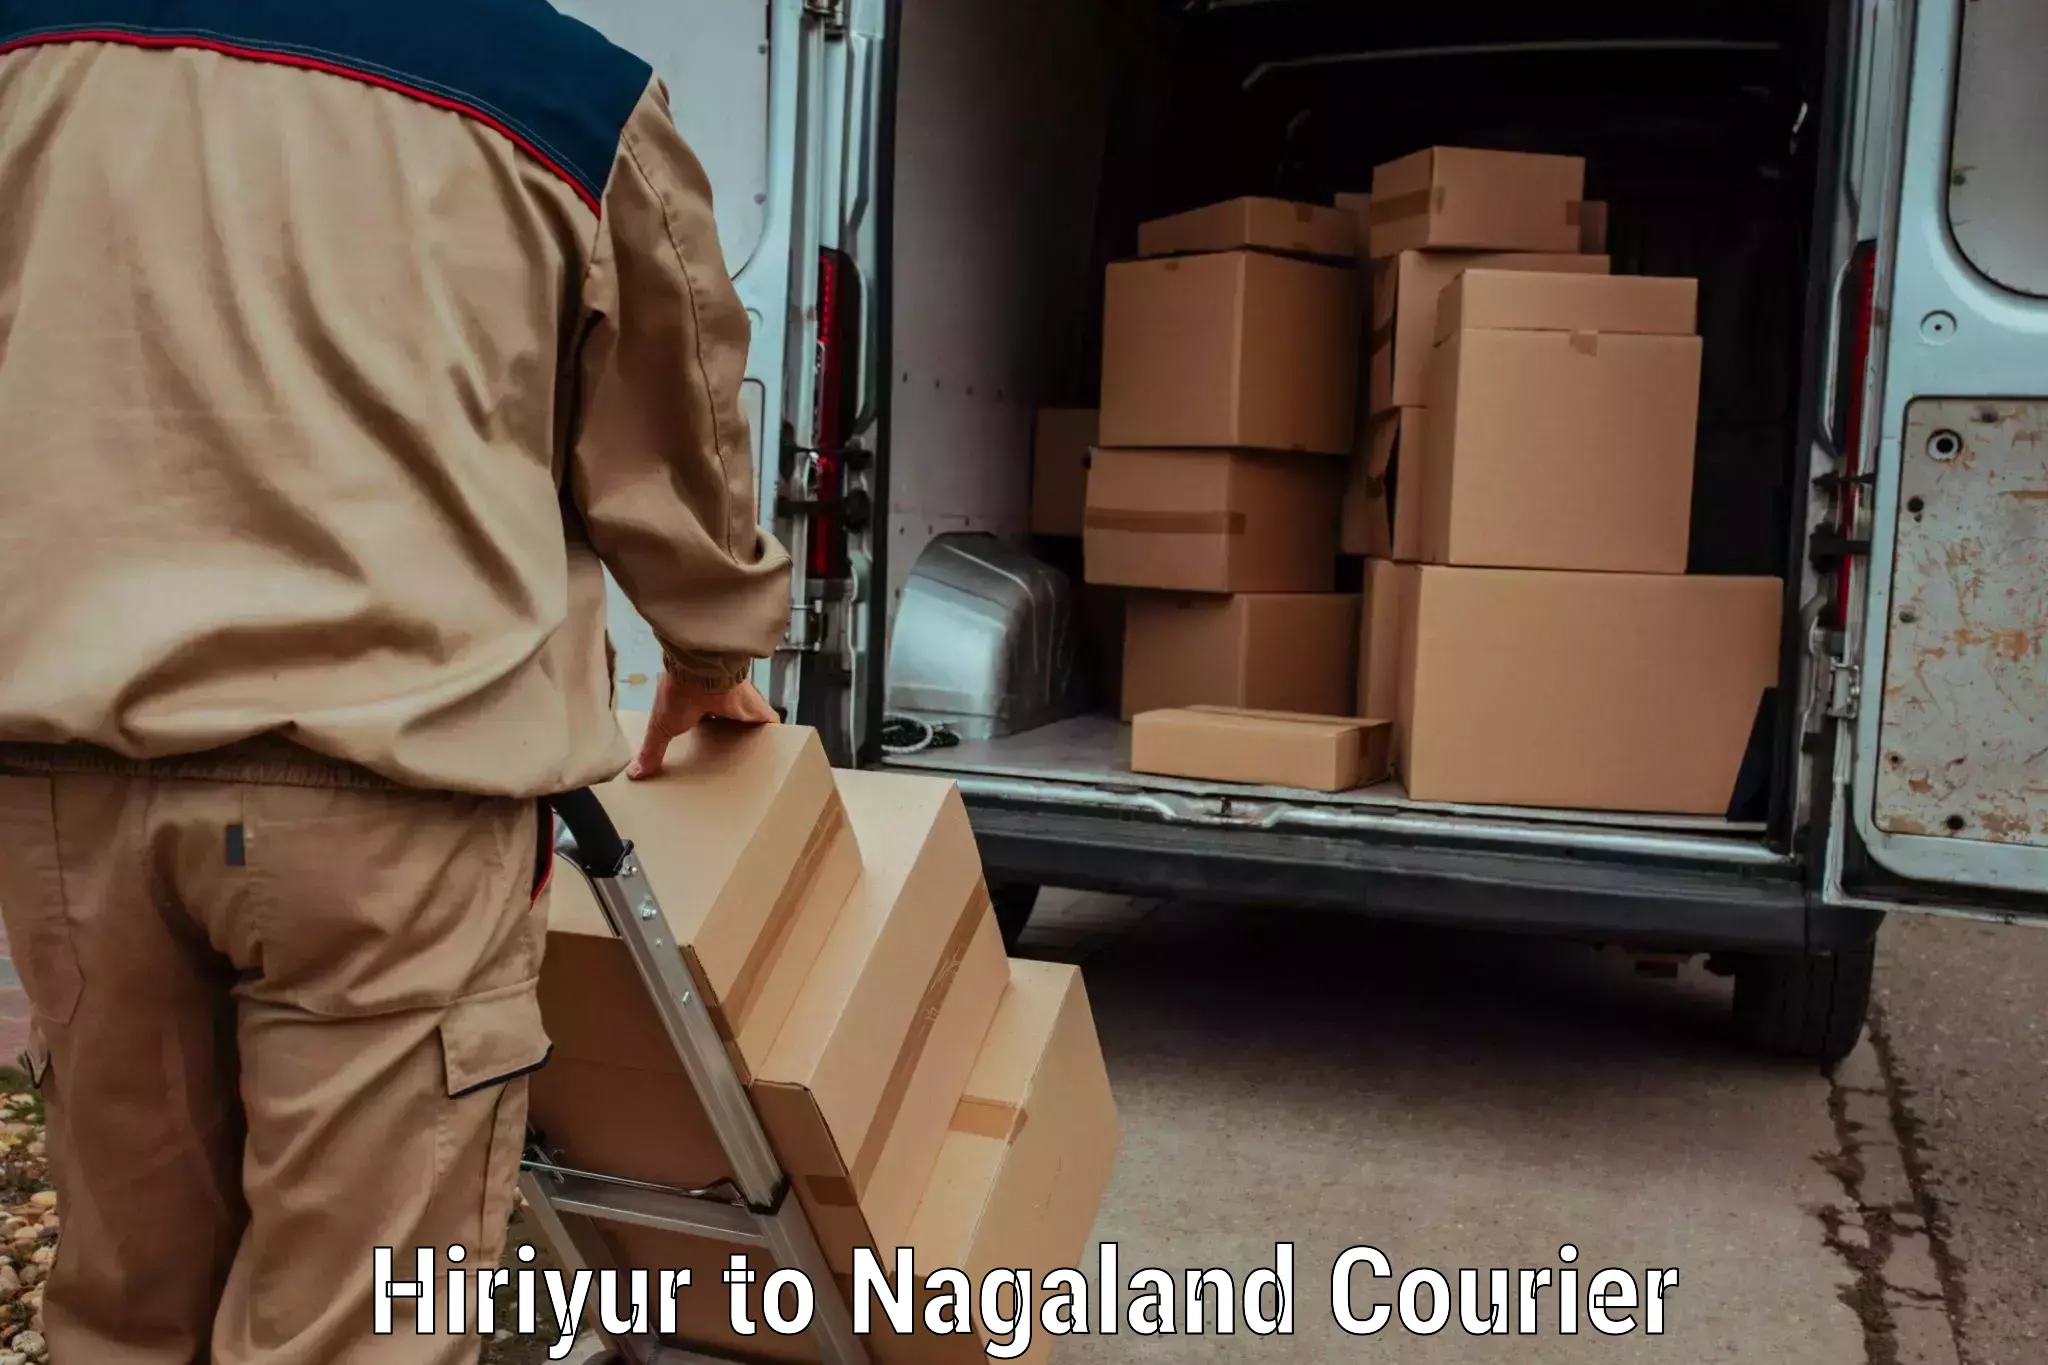 Business delivery service Hiriyur to Kohima